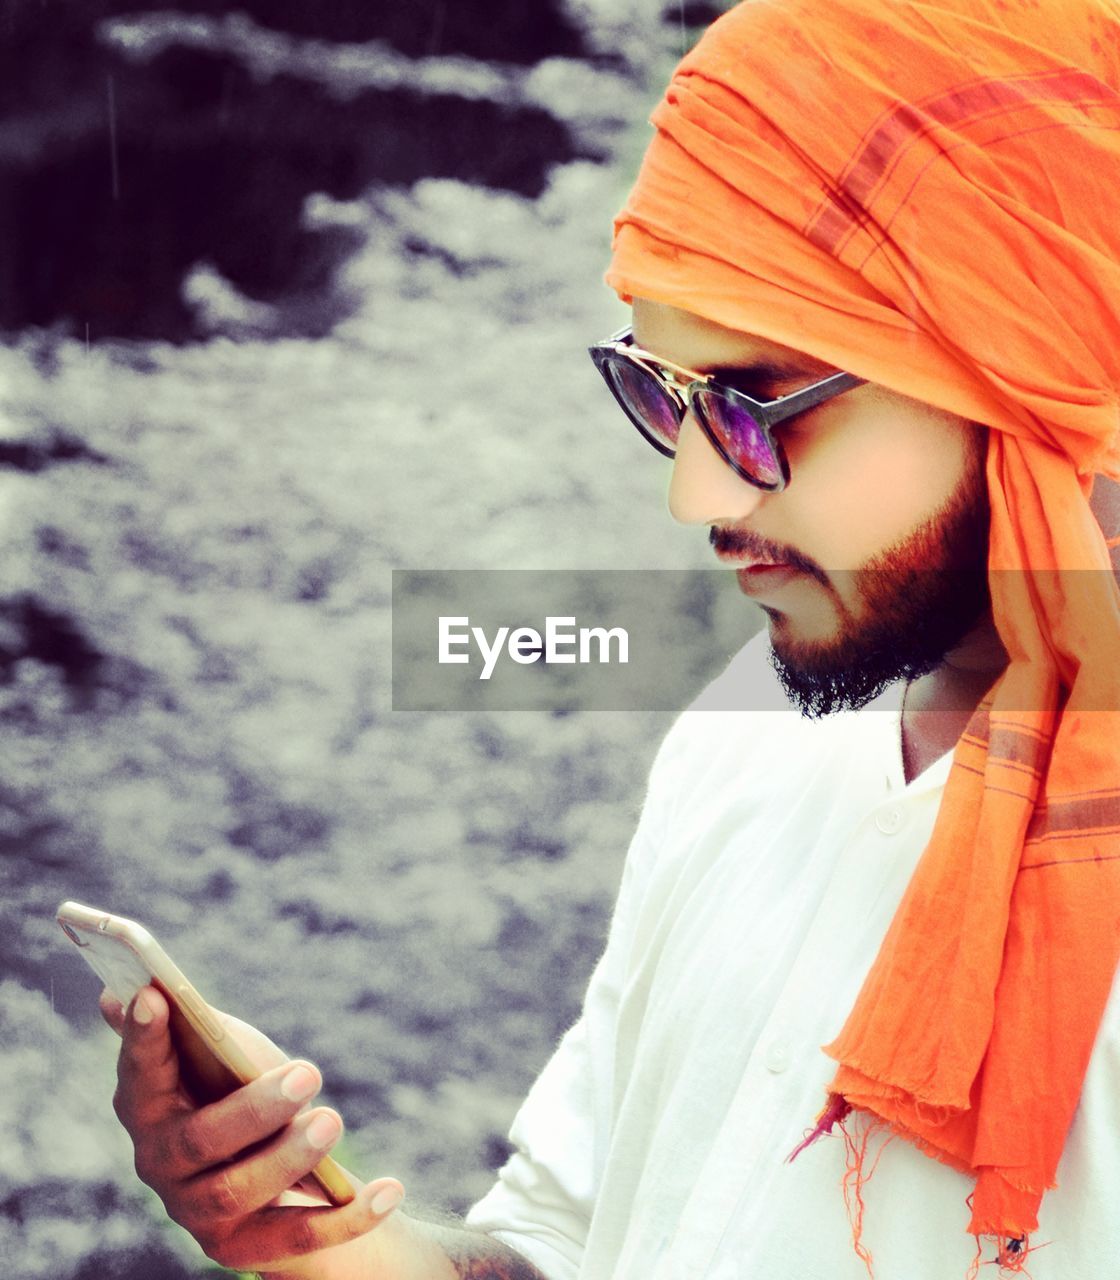 Man in turban and sunglasses using smart phone outdoors